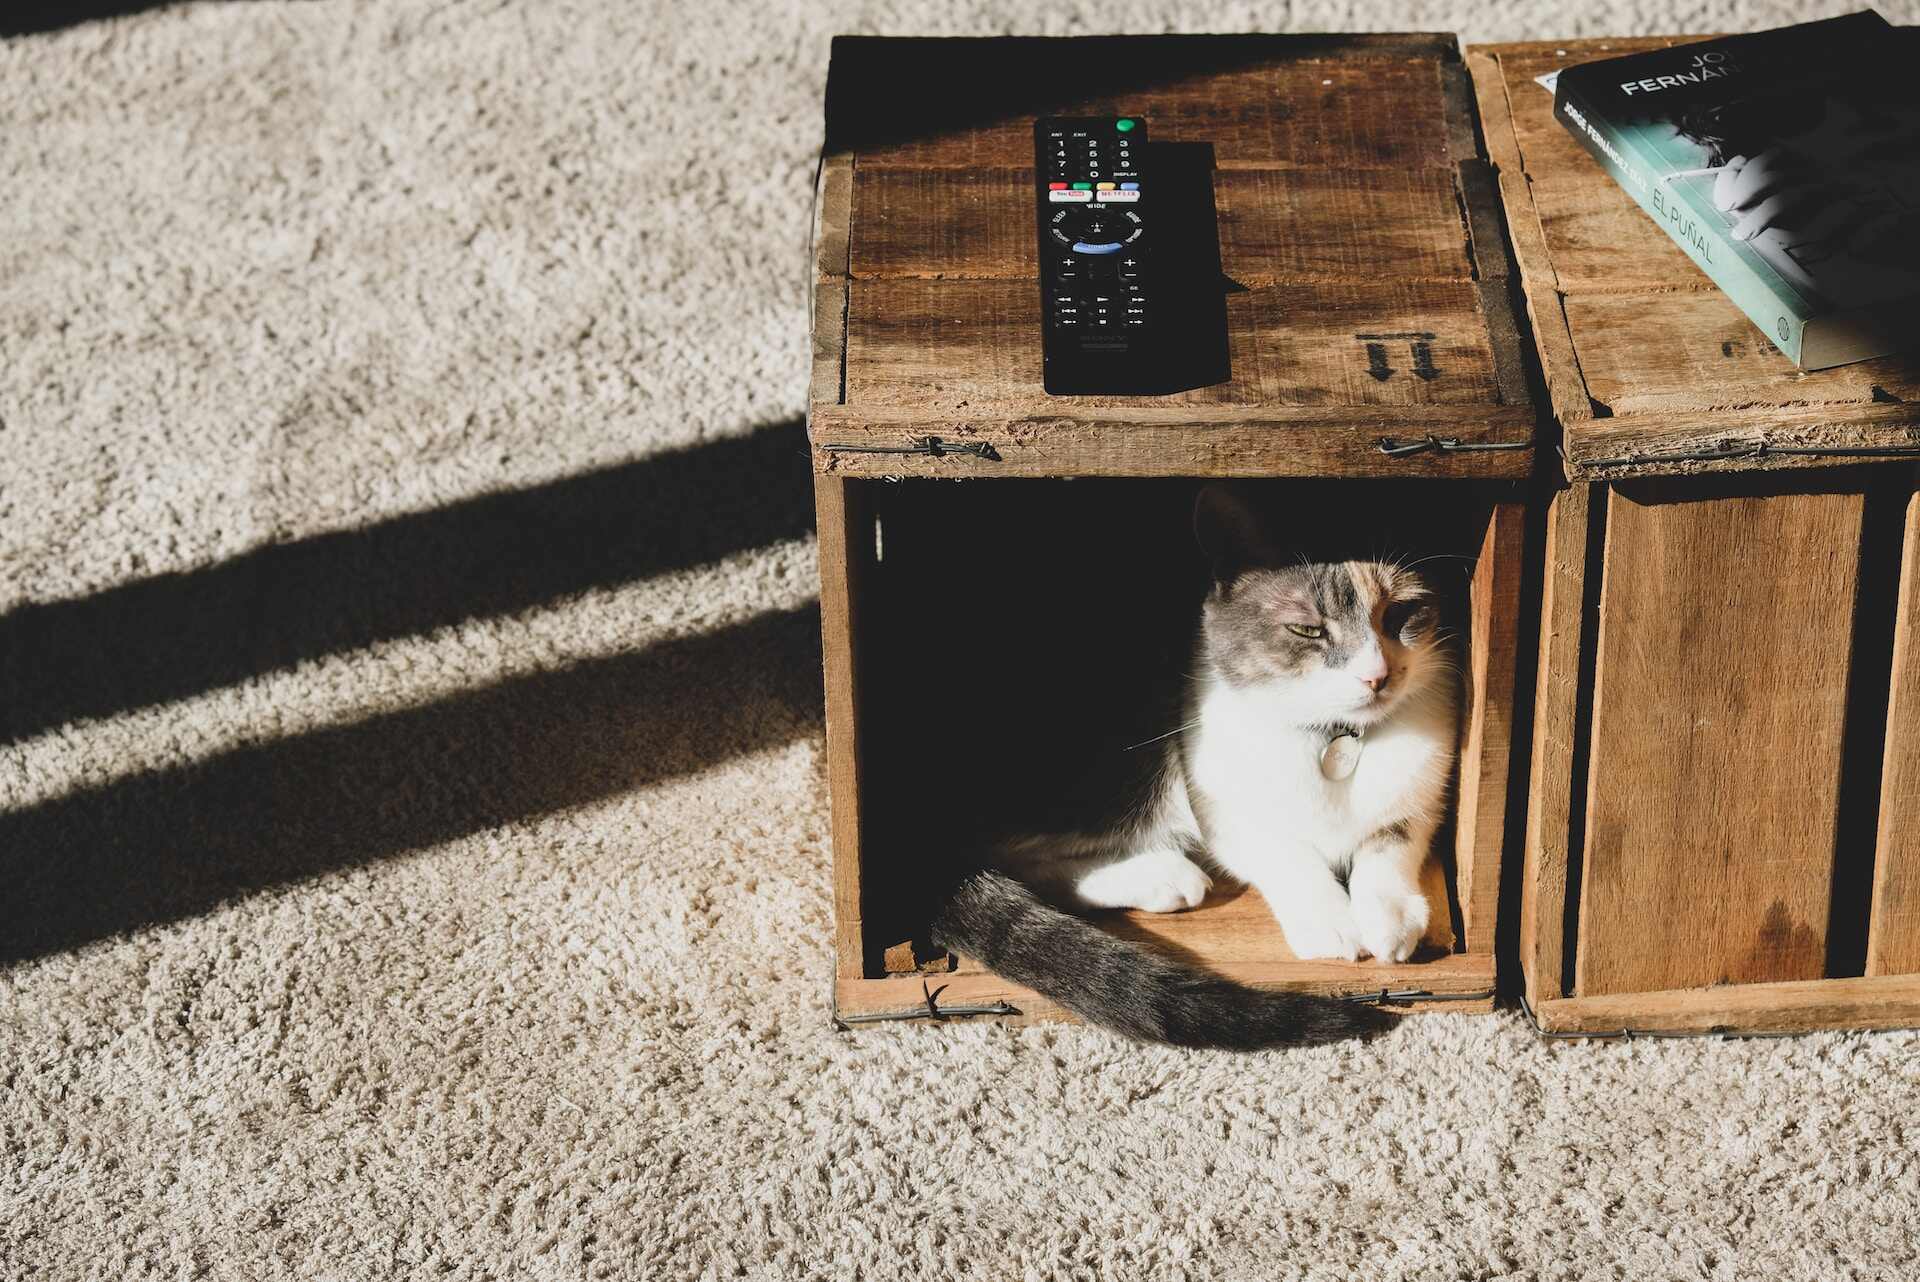 A cat sitting inside a wooden box indoors